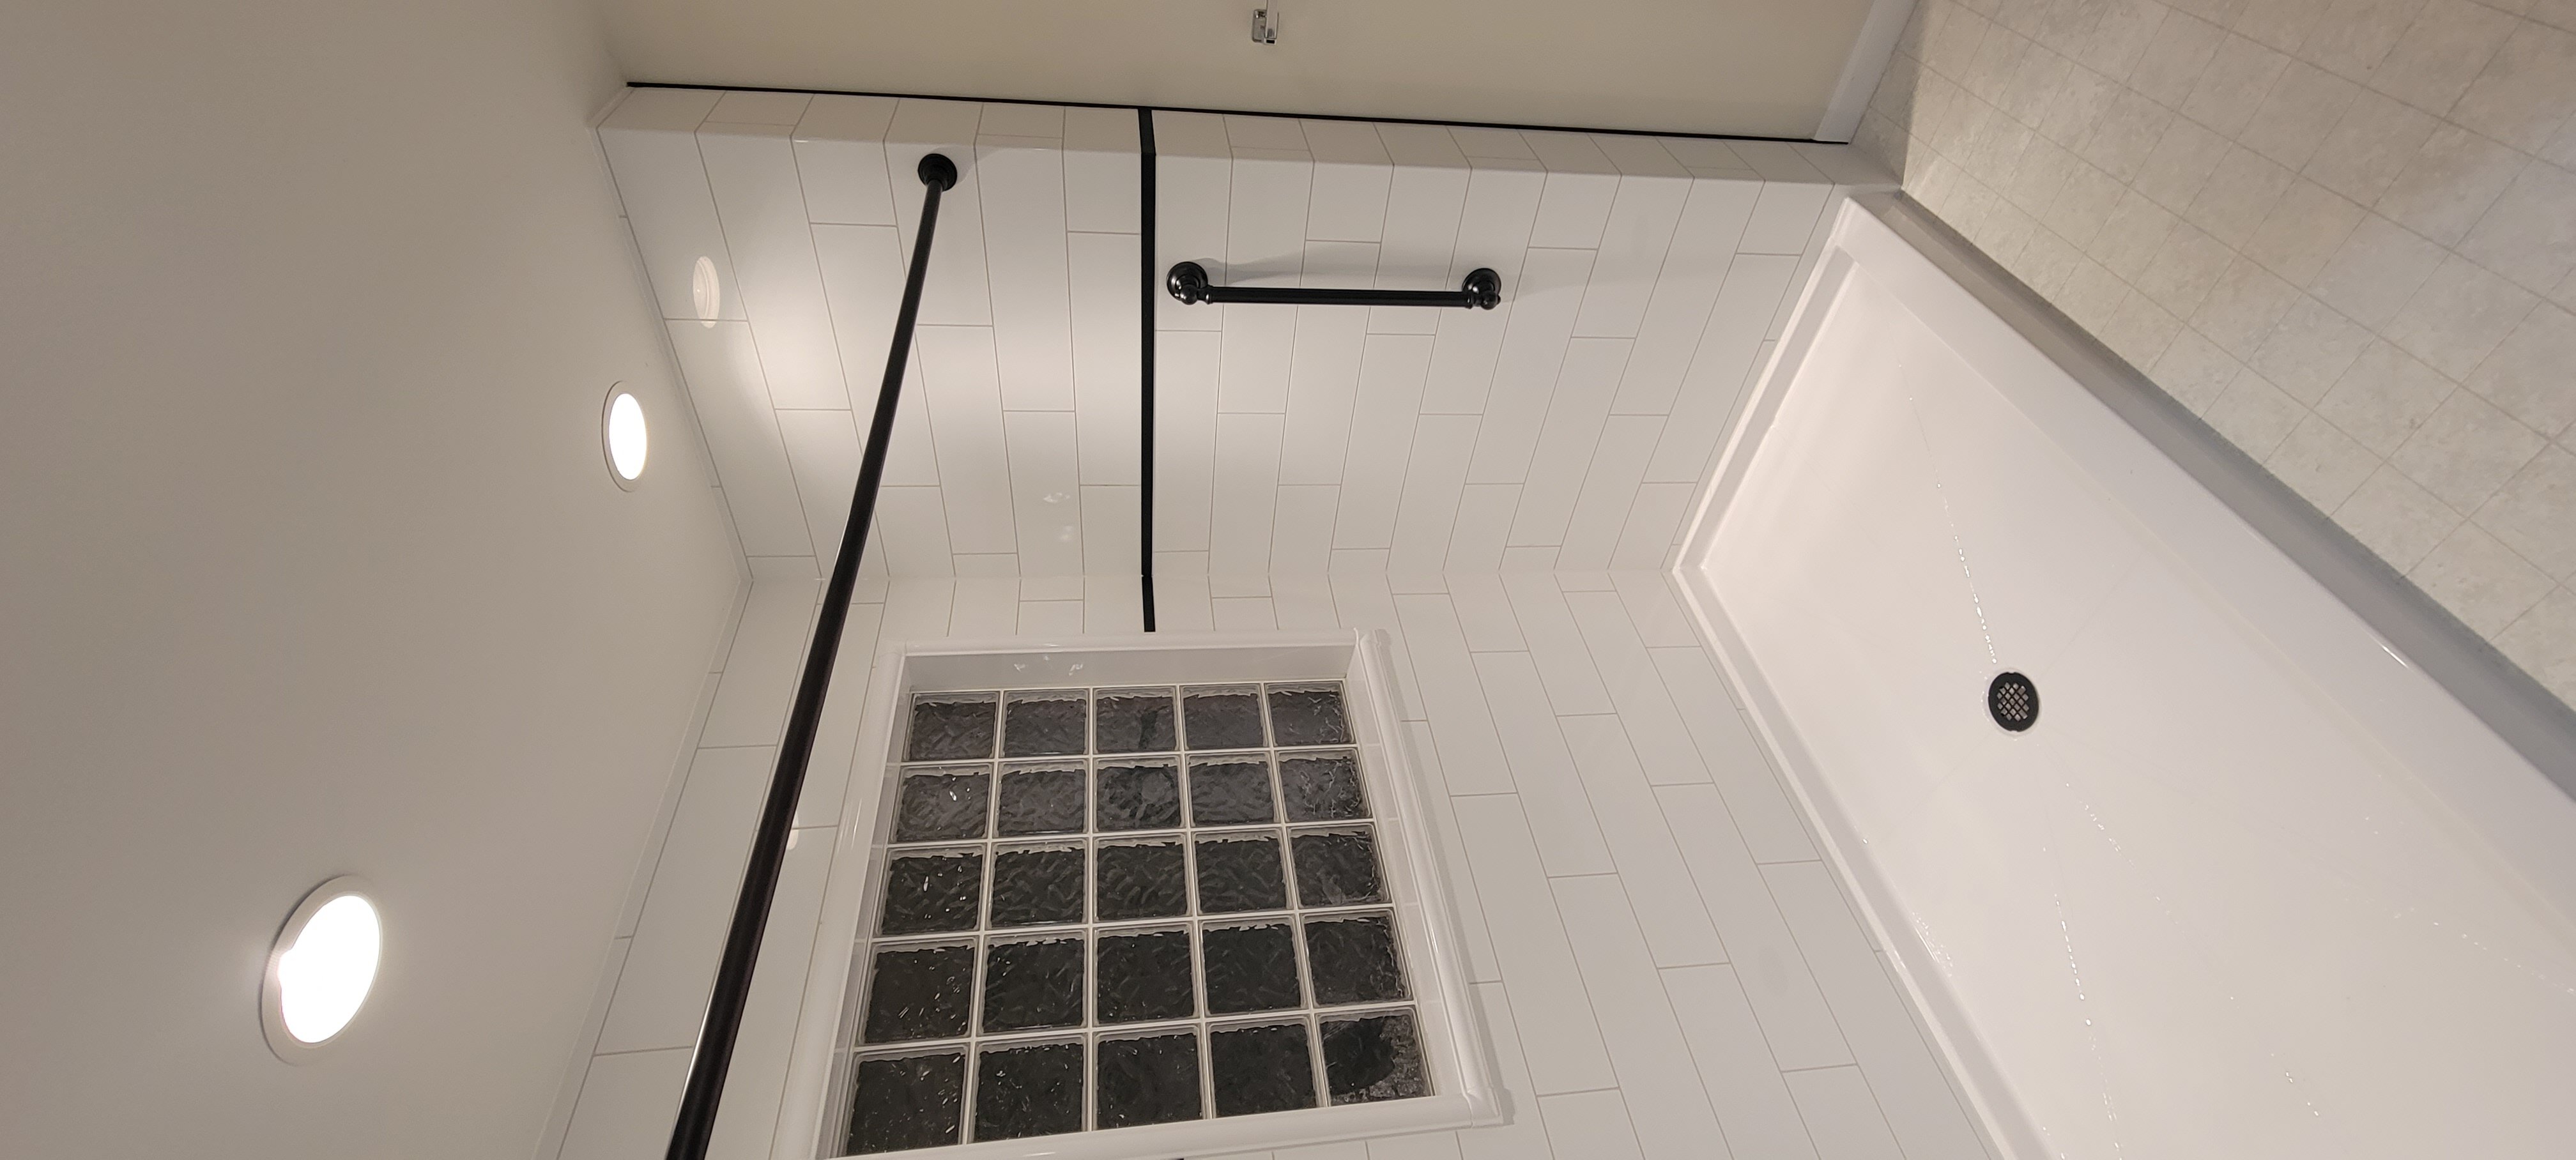 Completed lux bath shower